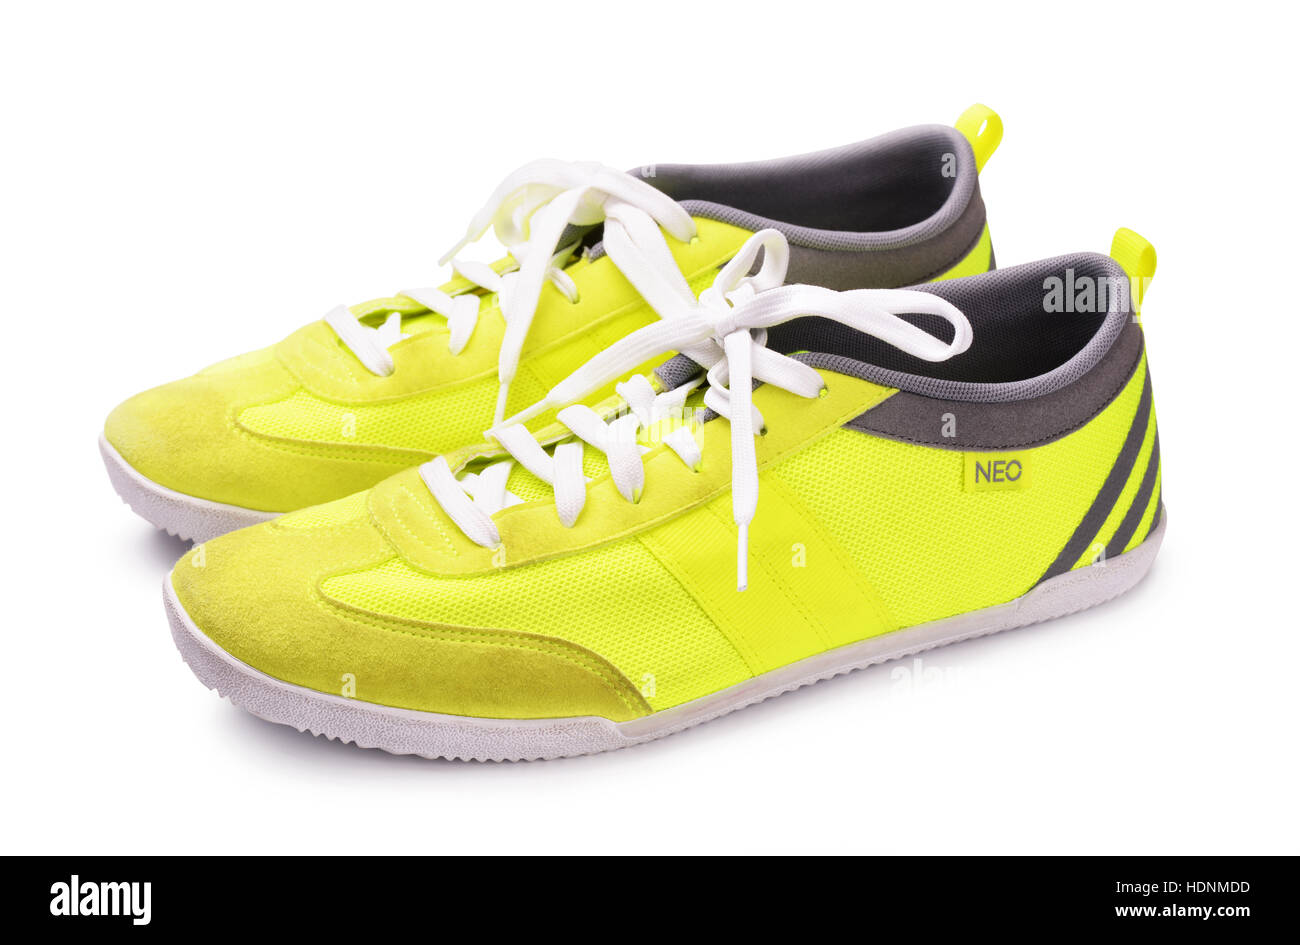 SAMARA, RUSSIA - June 8, 2015: Adidas Neo sneakers for running, football,  training, in gray and yellow, showing the Adidas logo and famous three  strip Stock Photo - Alamy